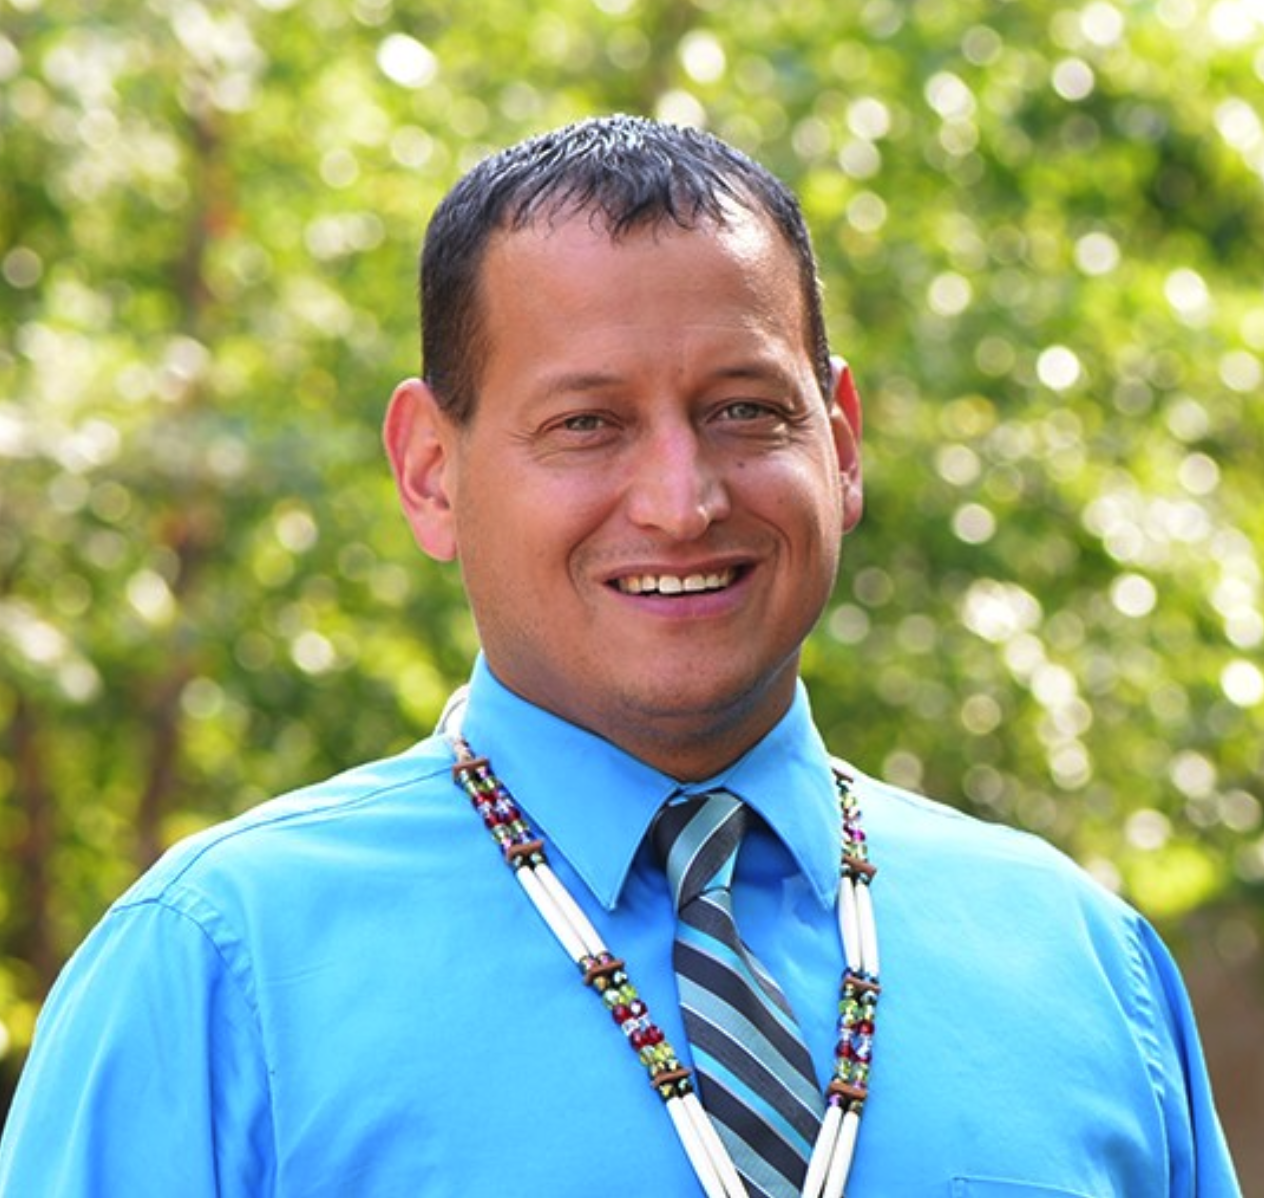 Mr Dropik smiling, wearing a blue collared shirt with a striped tie and beaded medallion. Green trees are in the background.